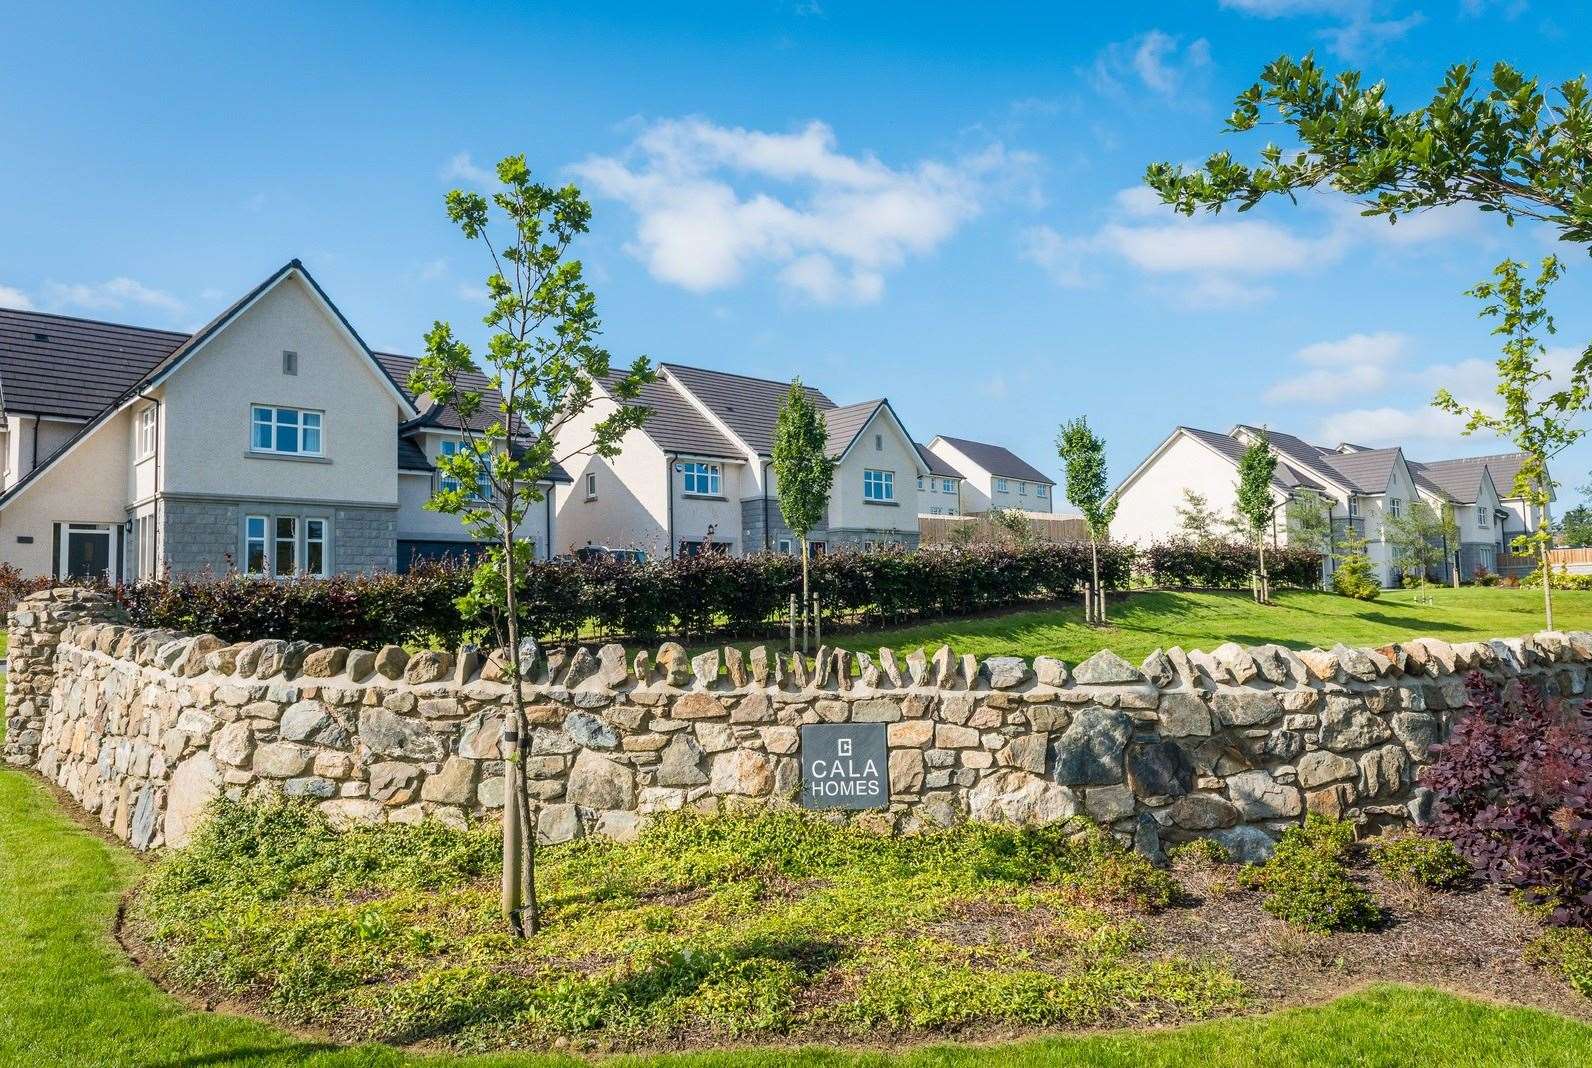 Cala Homes - The Grove, Inverurie development could see further expansion.